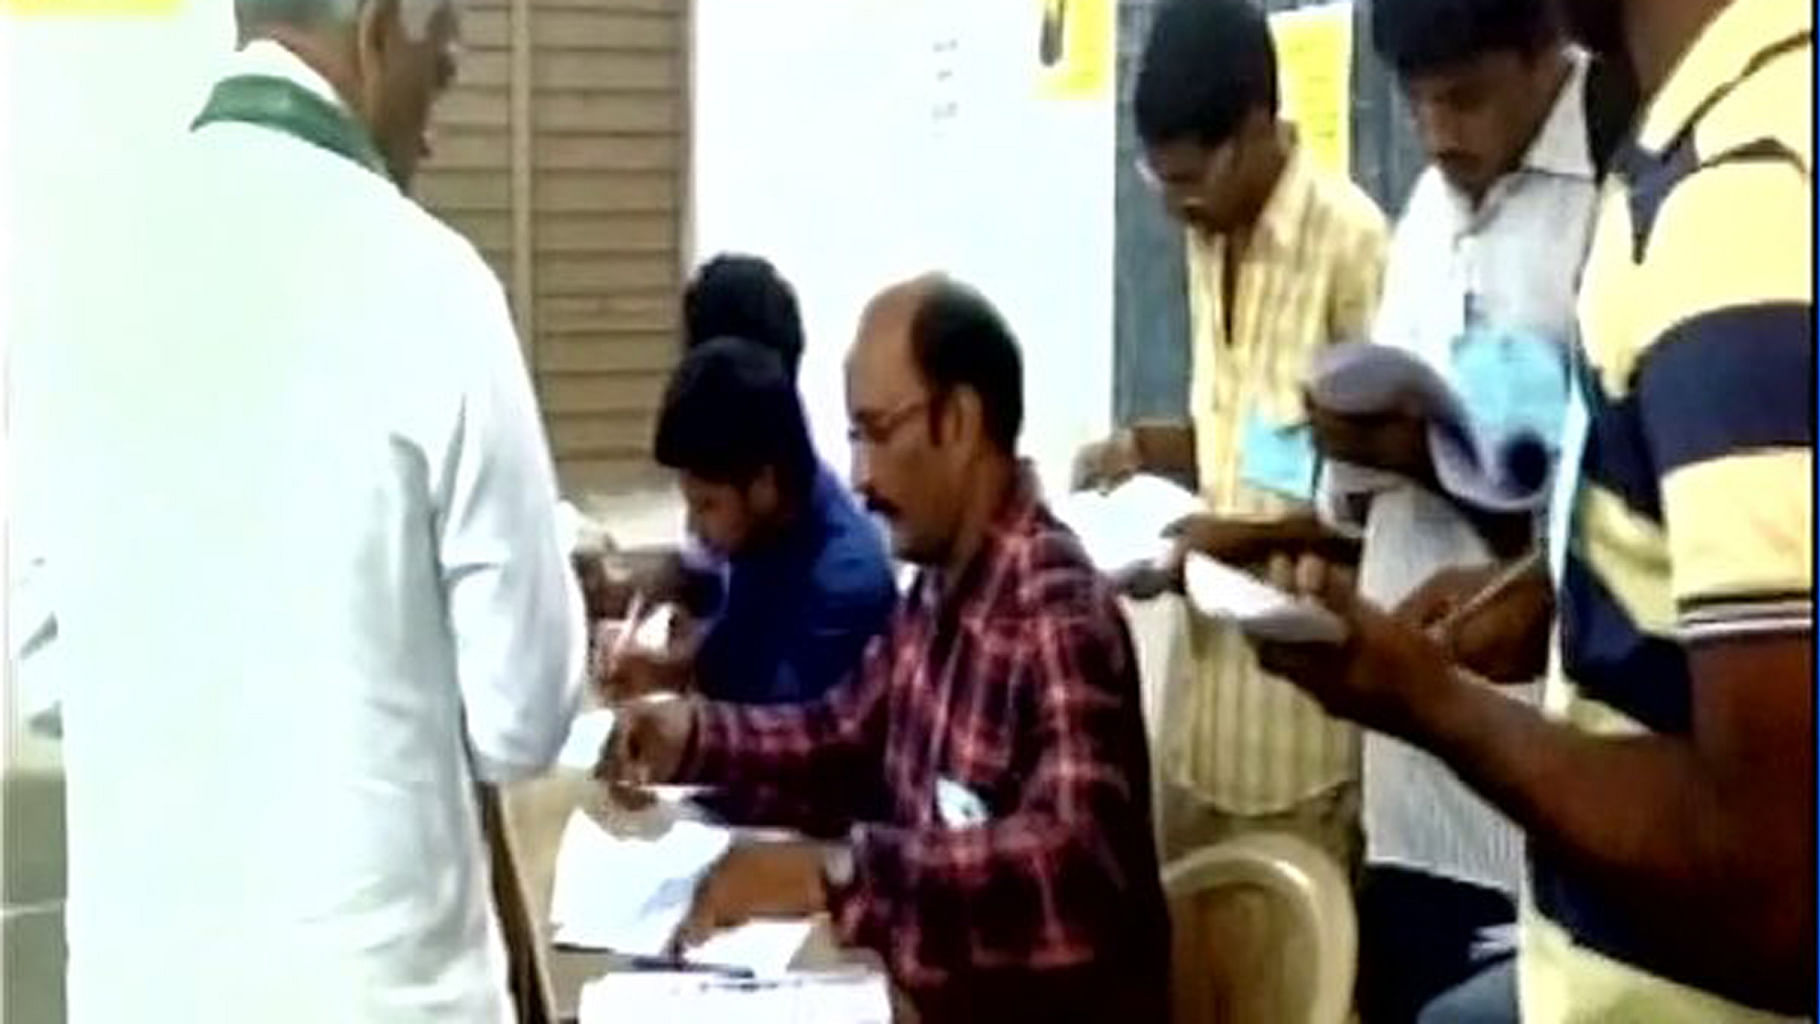 More than 30 percent of the 9.41 lakh voters cast their franchise in Puducherry till 11.30am. (Photo courtesy: ANI screengrab)